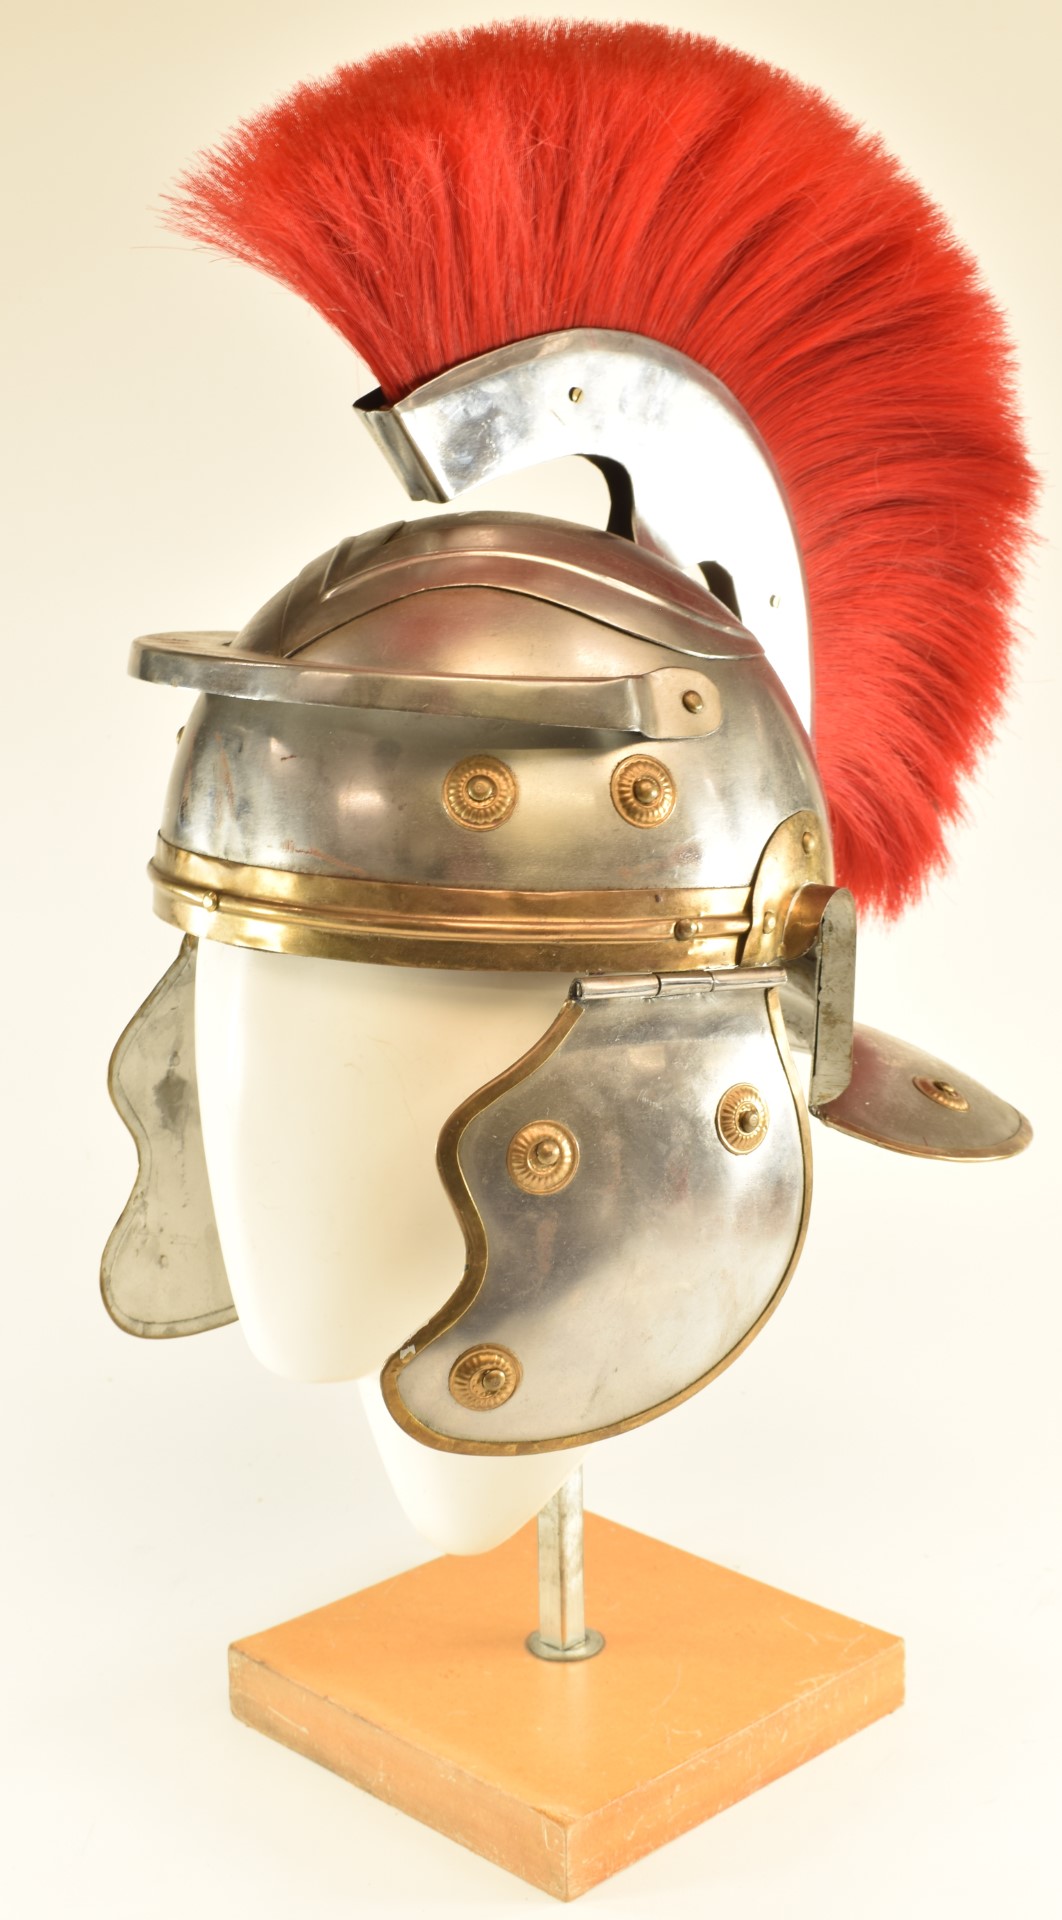 Replica Roman Centurion's steel helmet with red plume, brass edging and rosettes and leather lining.